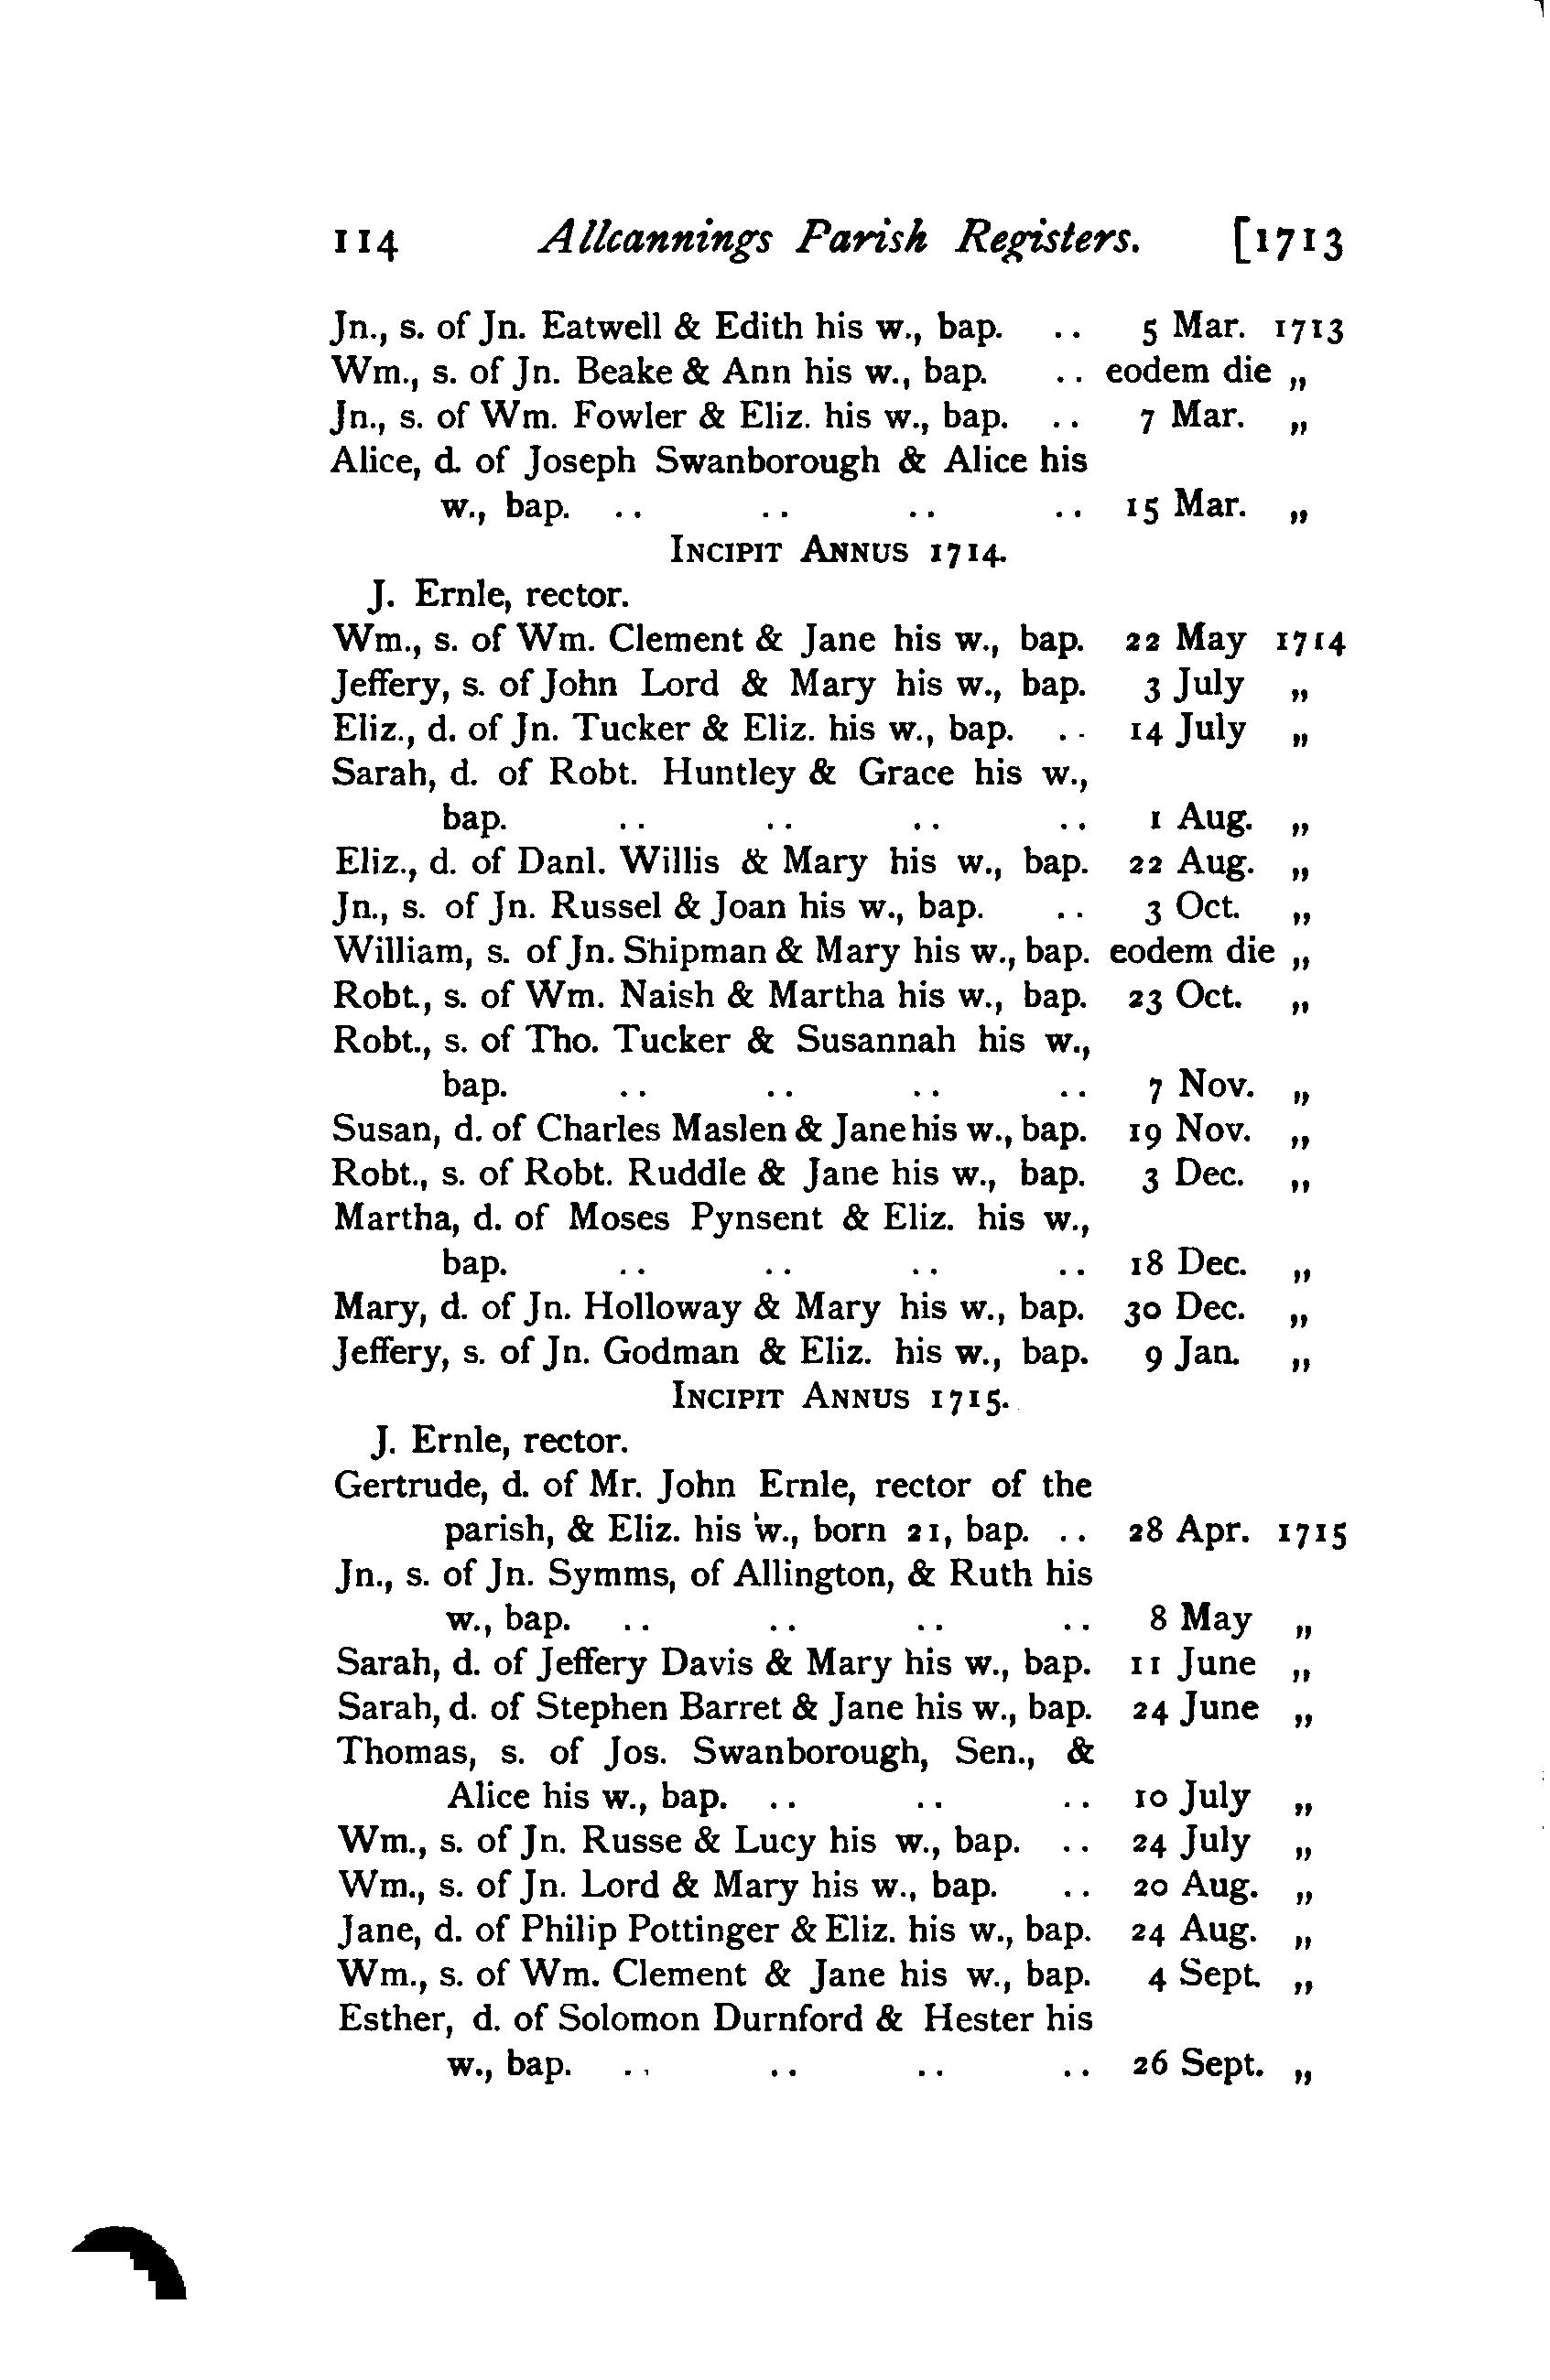 1905 transcript showing baptism of Alice Swanborough in 1713 and Thomas in 1715